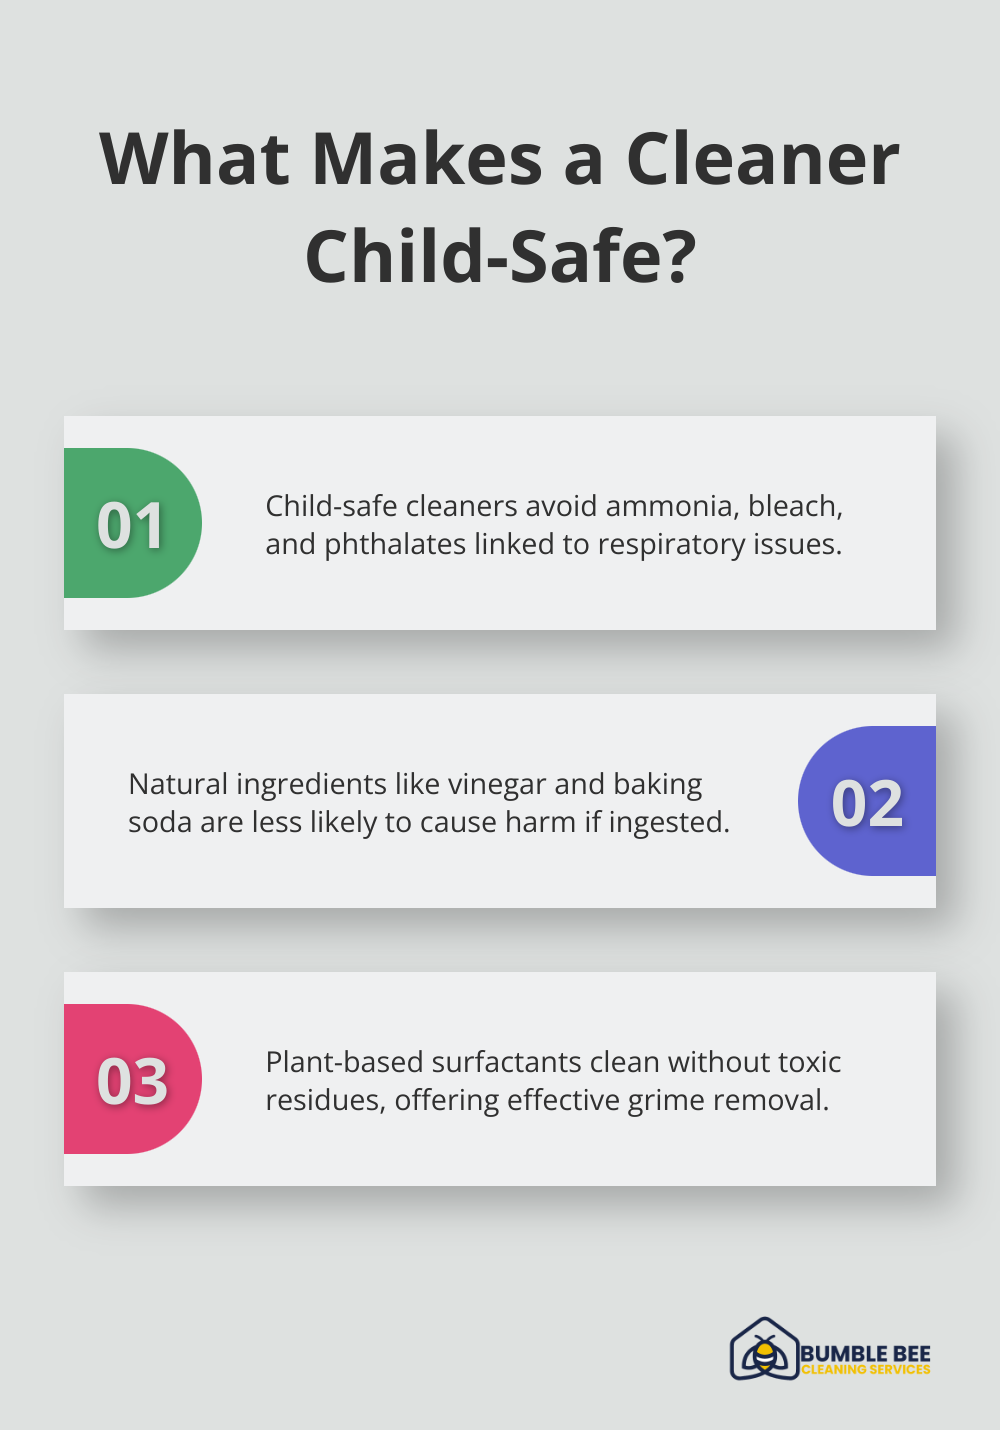 Fact - What Makes a Cleaner Child-Safe?